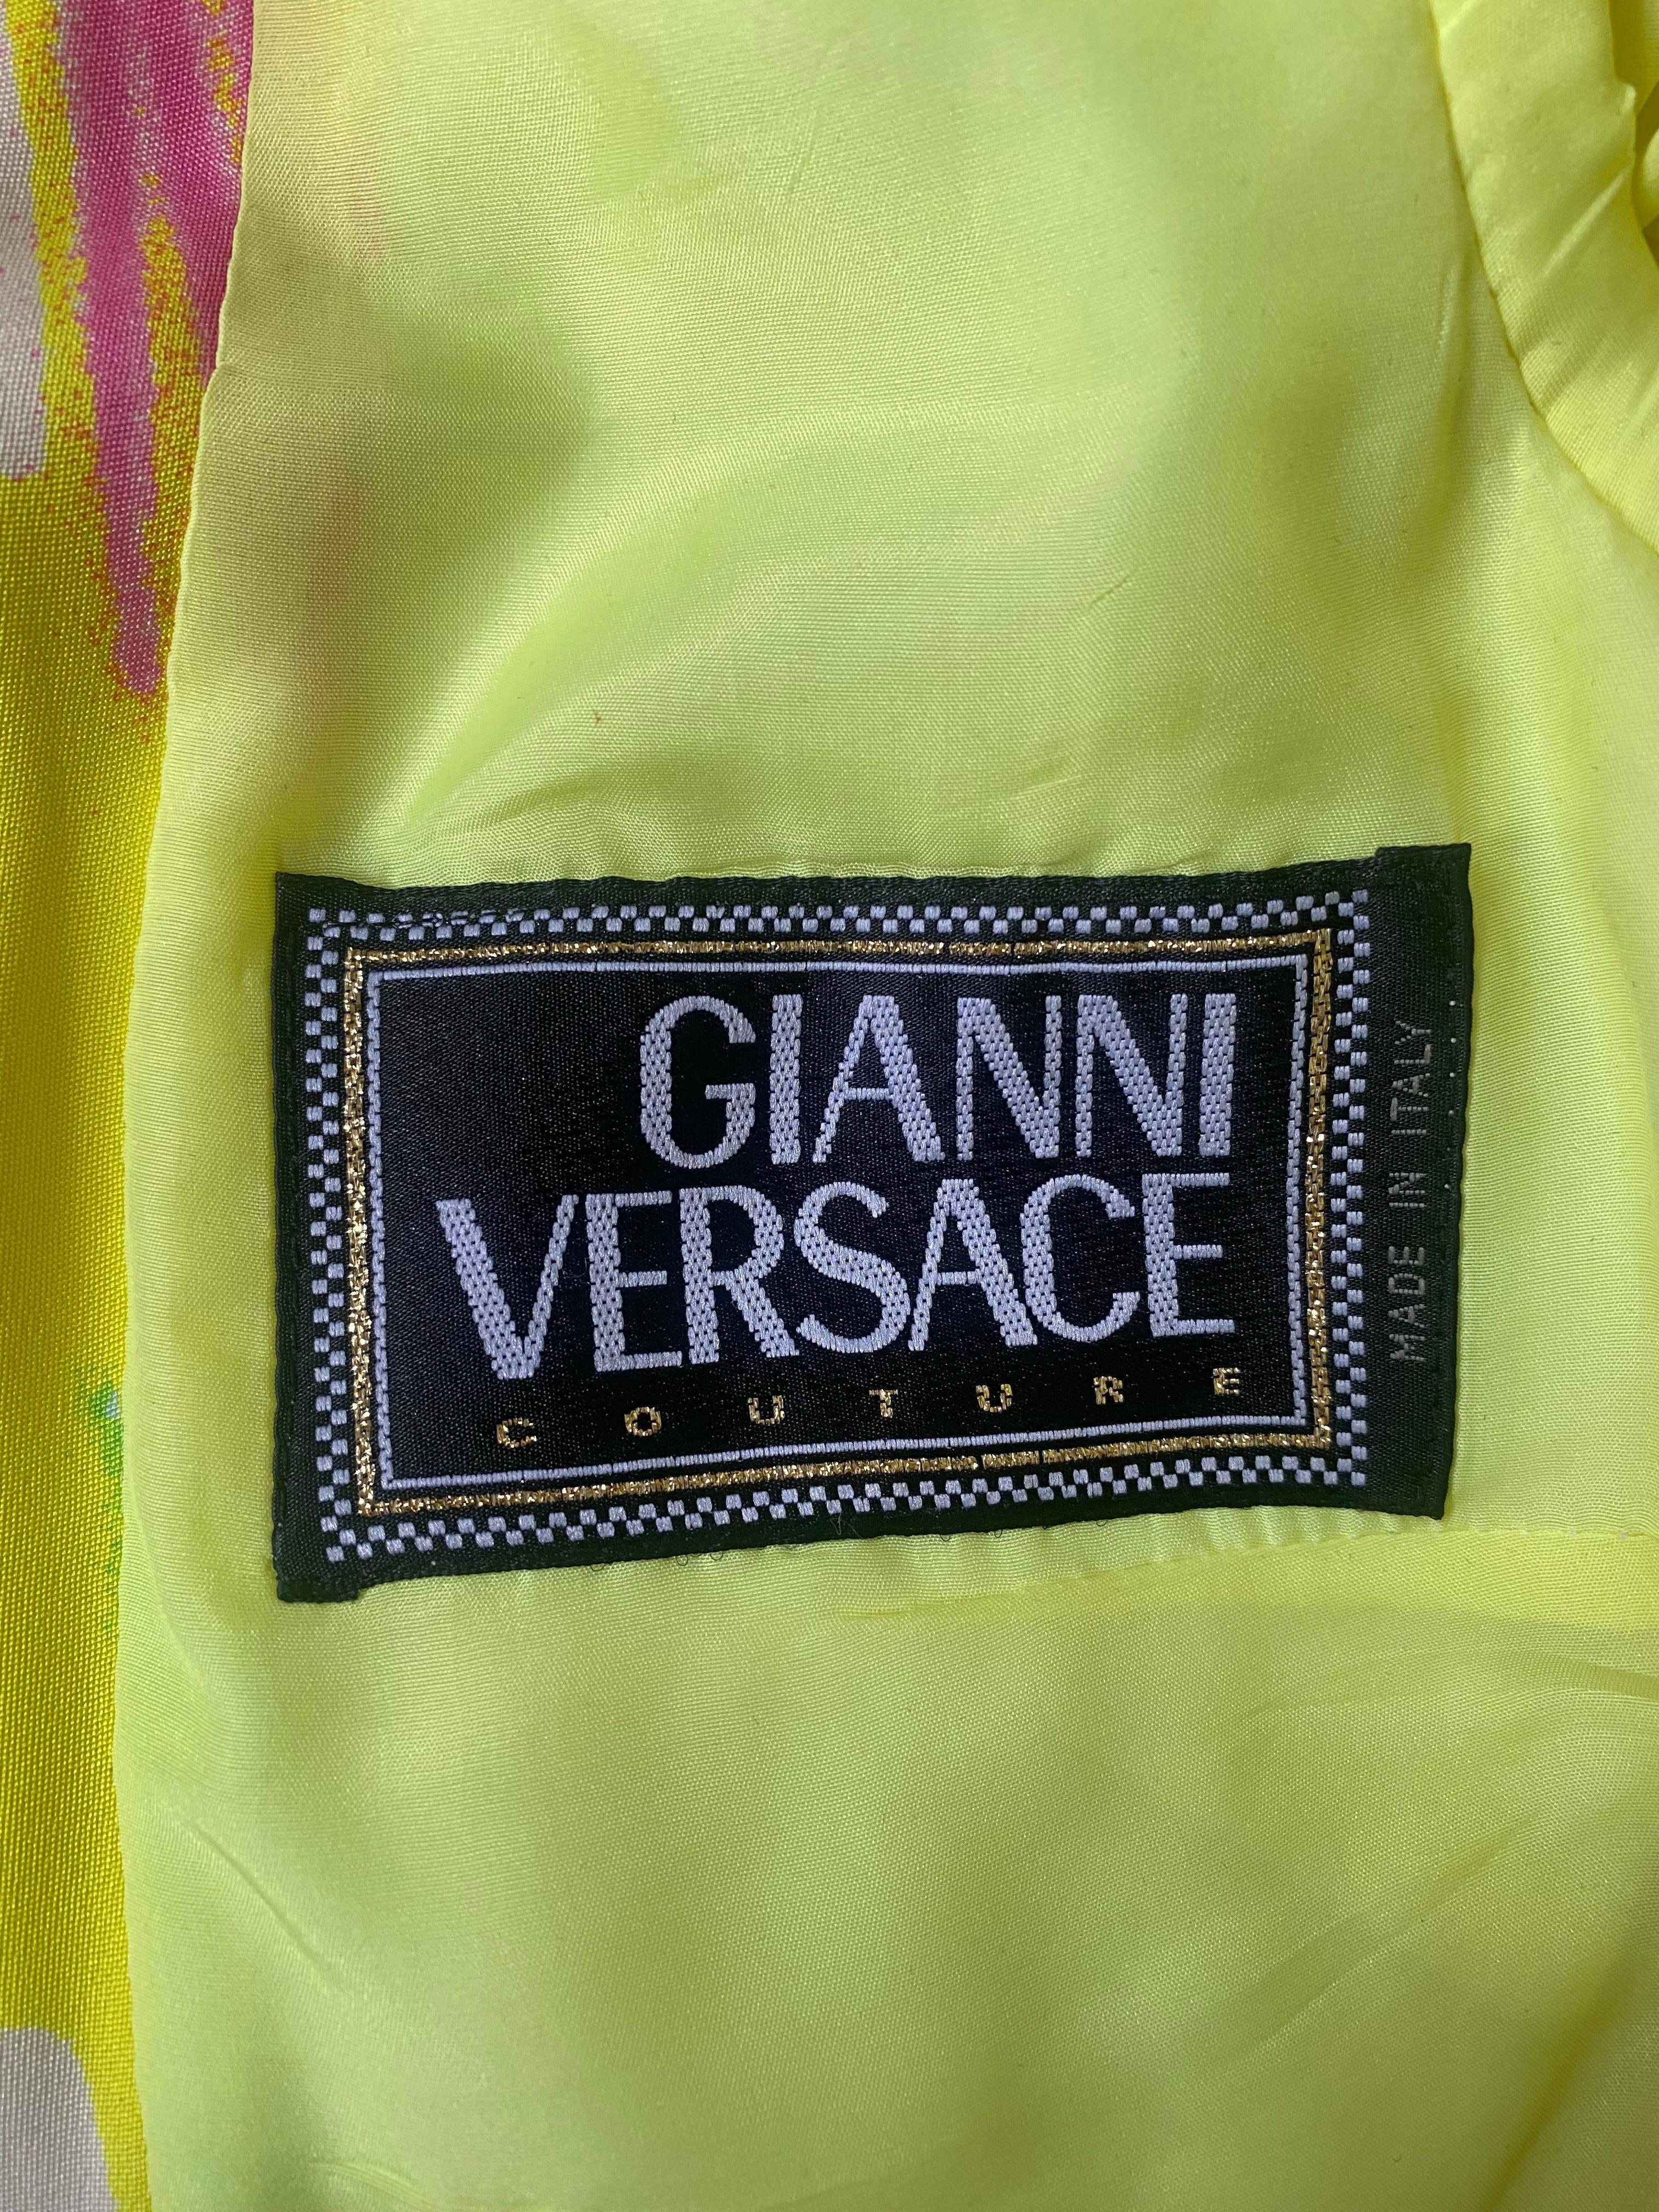 1996 Gianni Versace Yellow Jacket Dress Suit For Sale 3